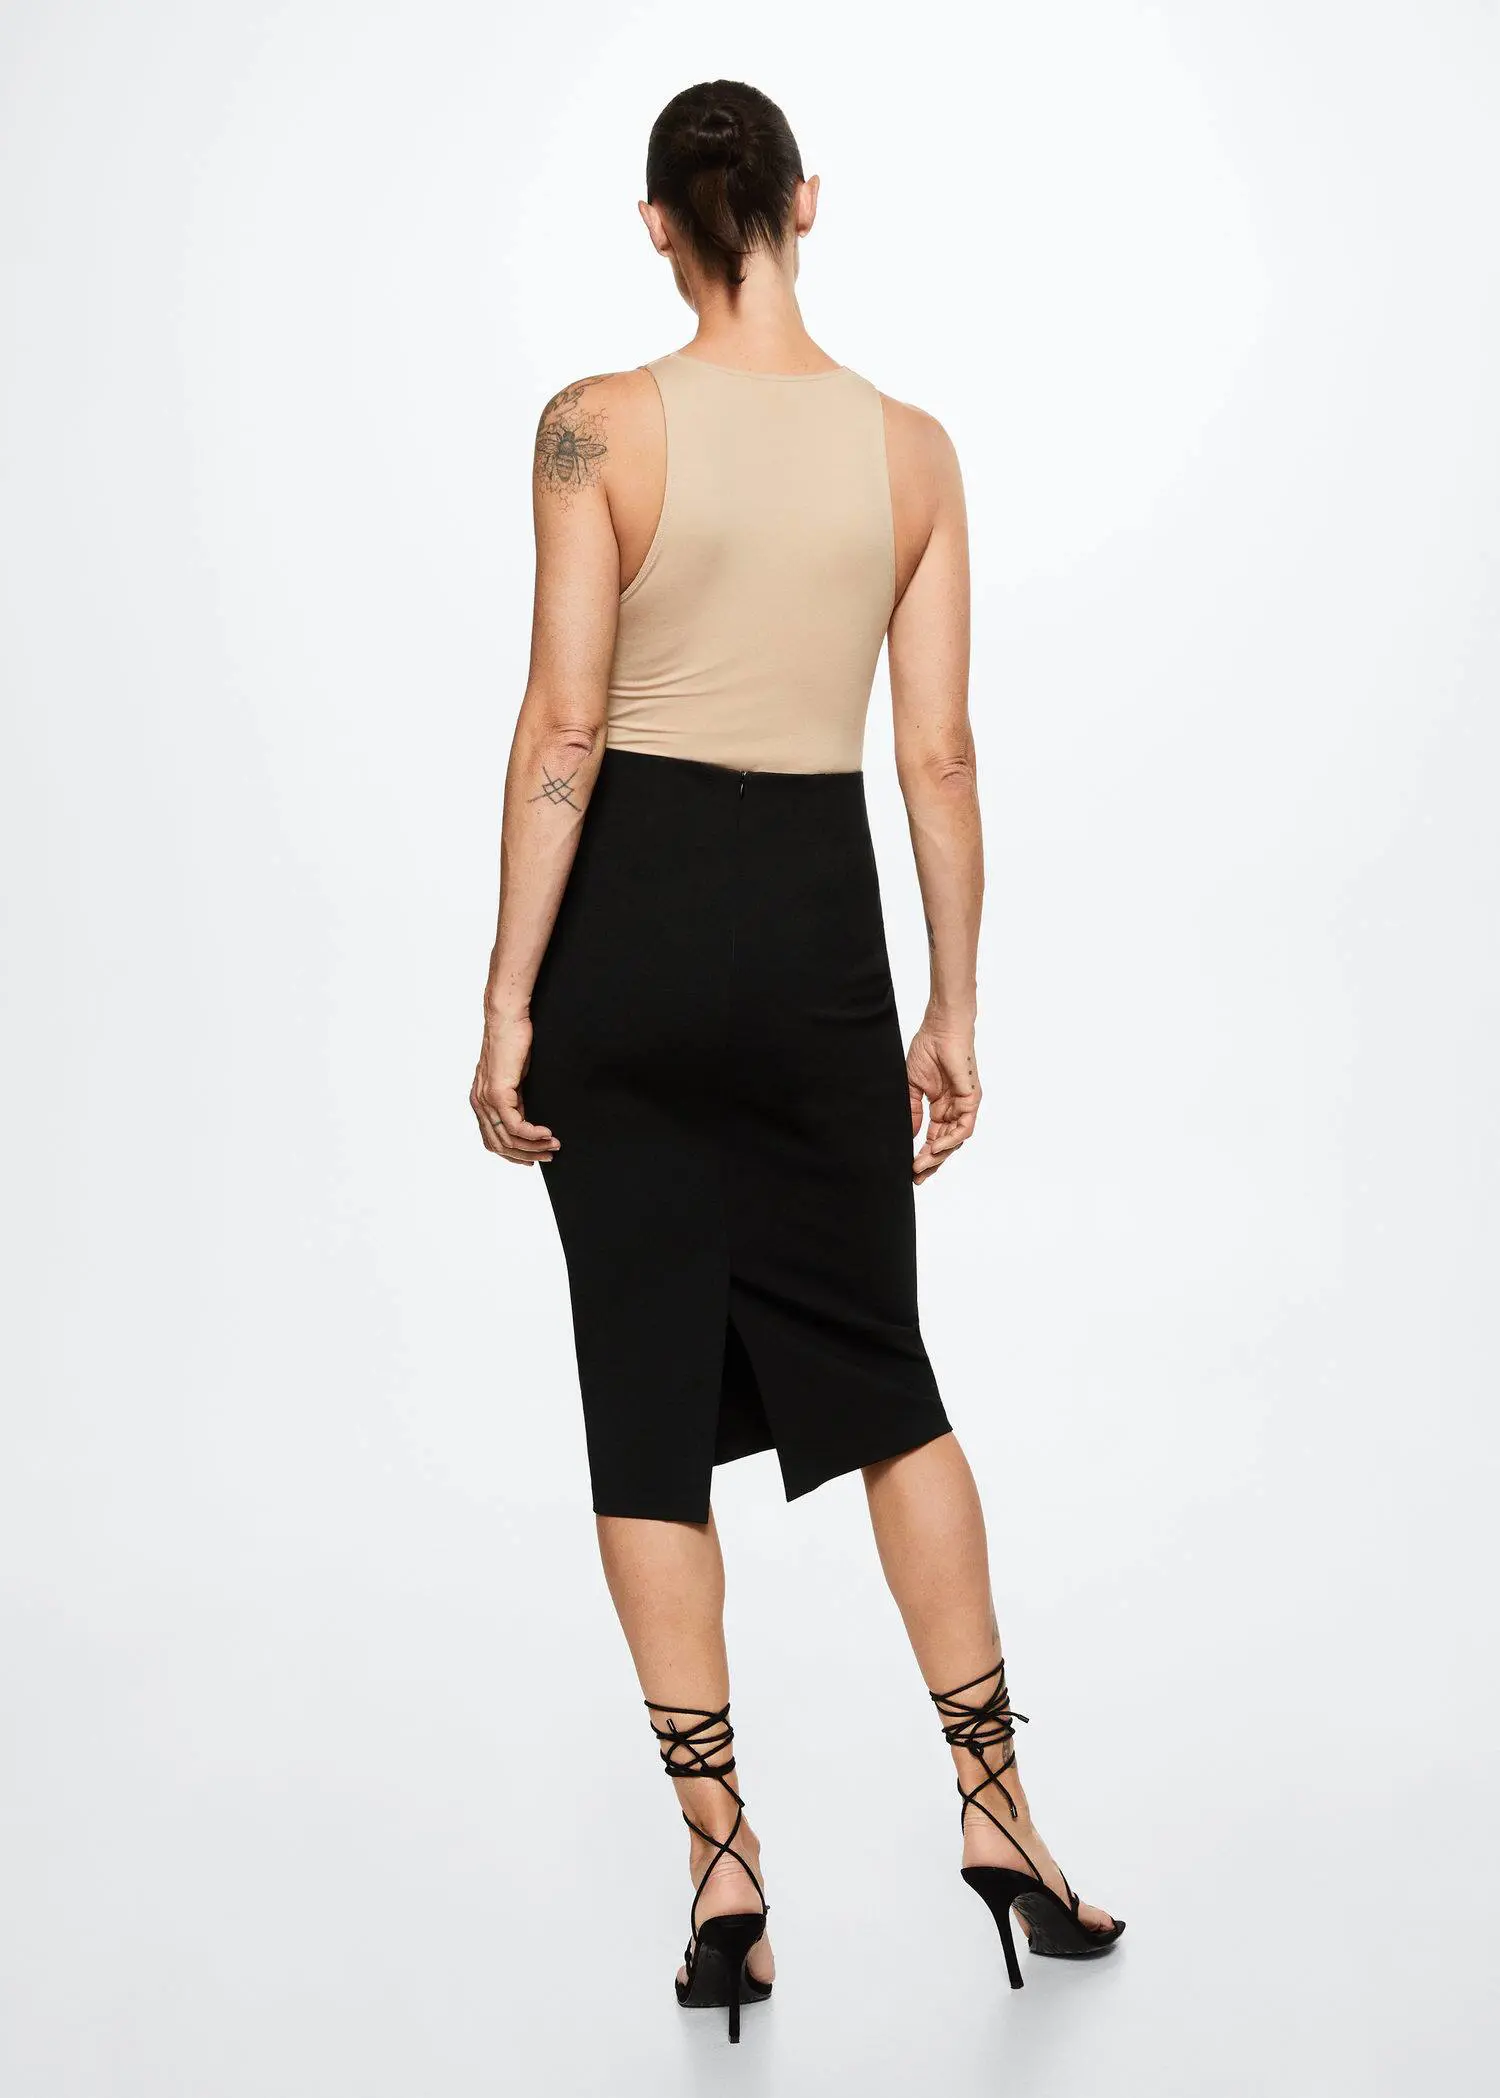 Mango Opening pencil skirt. a woman wearing a black skirt and a tan top. 